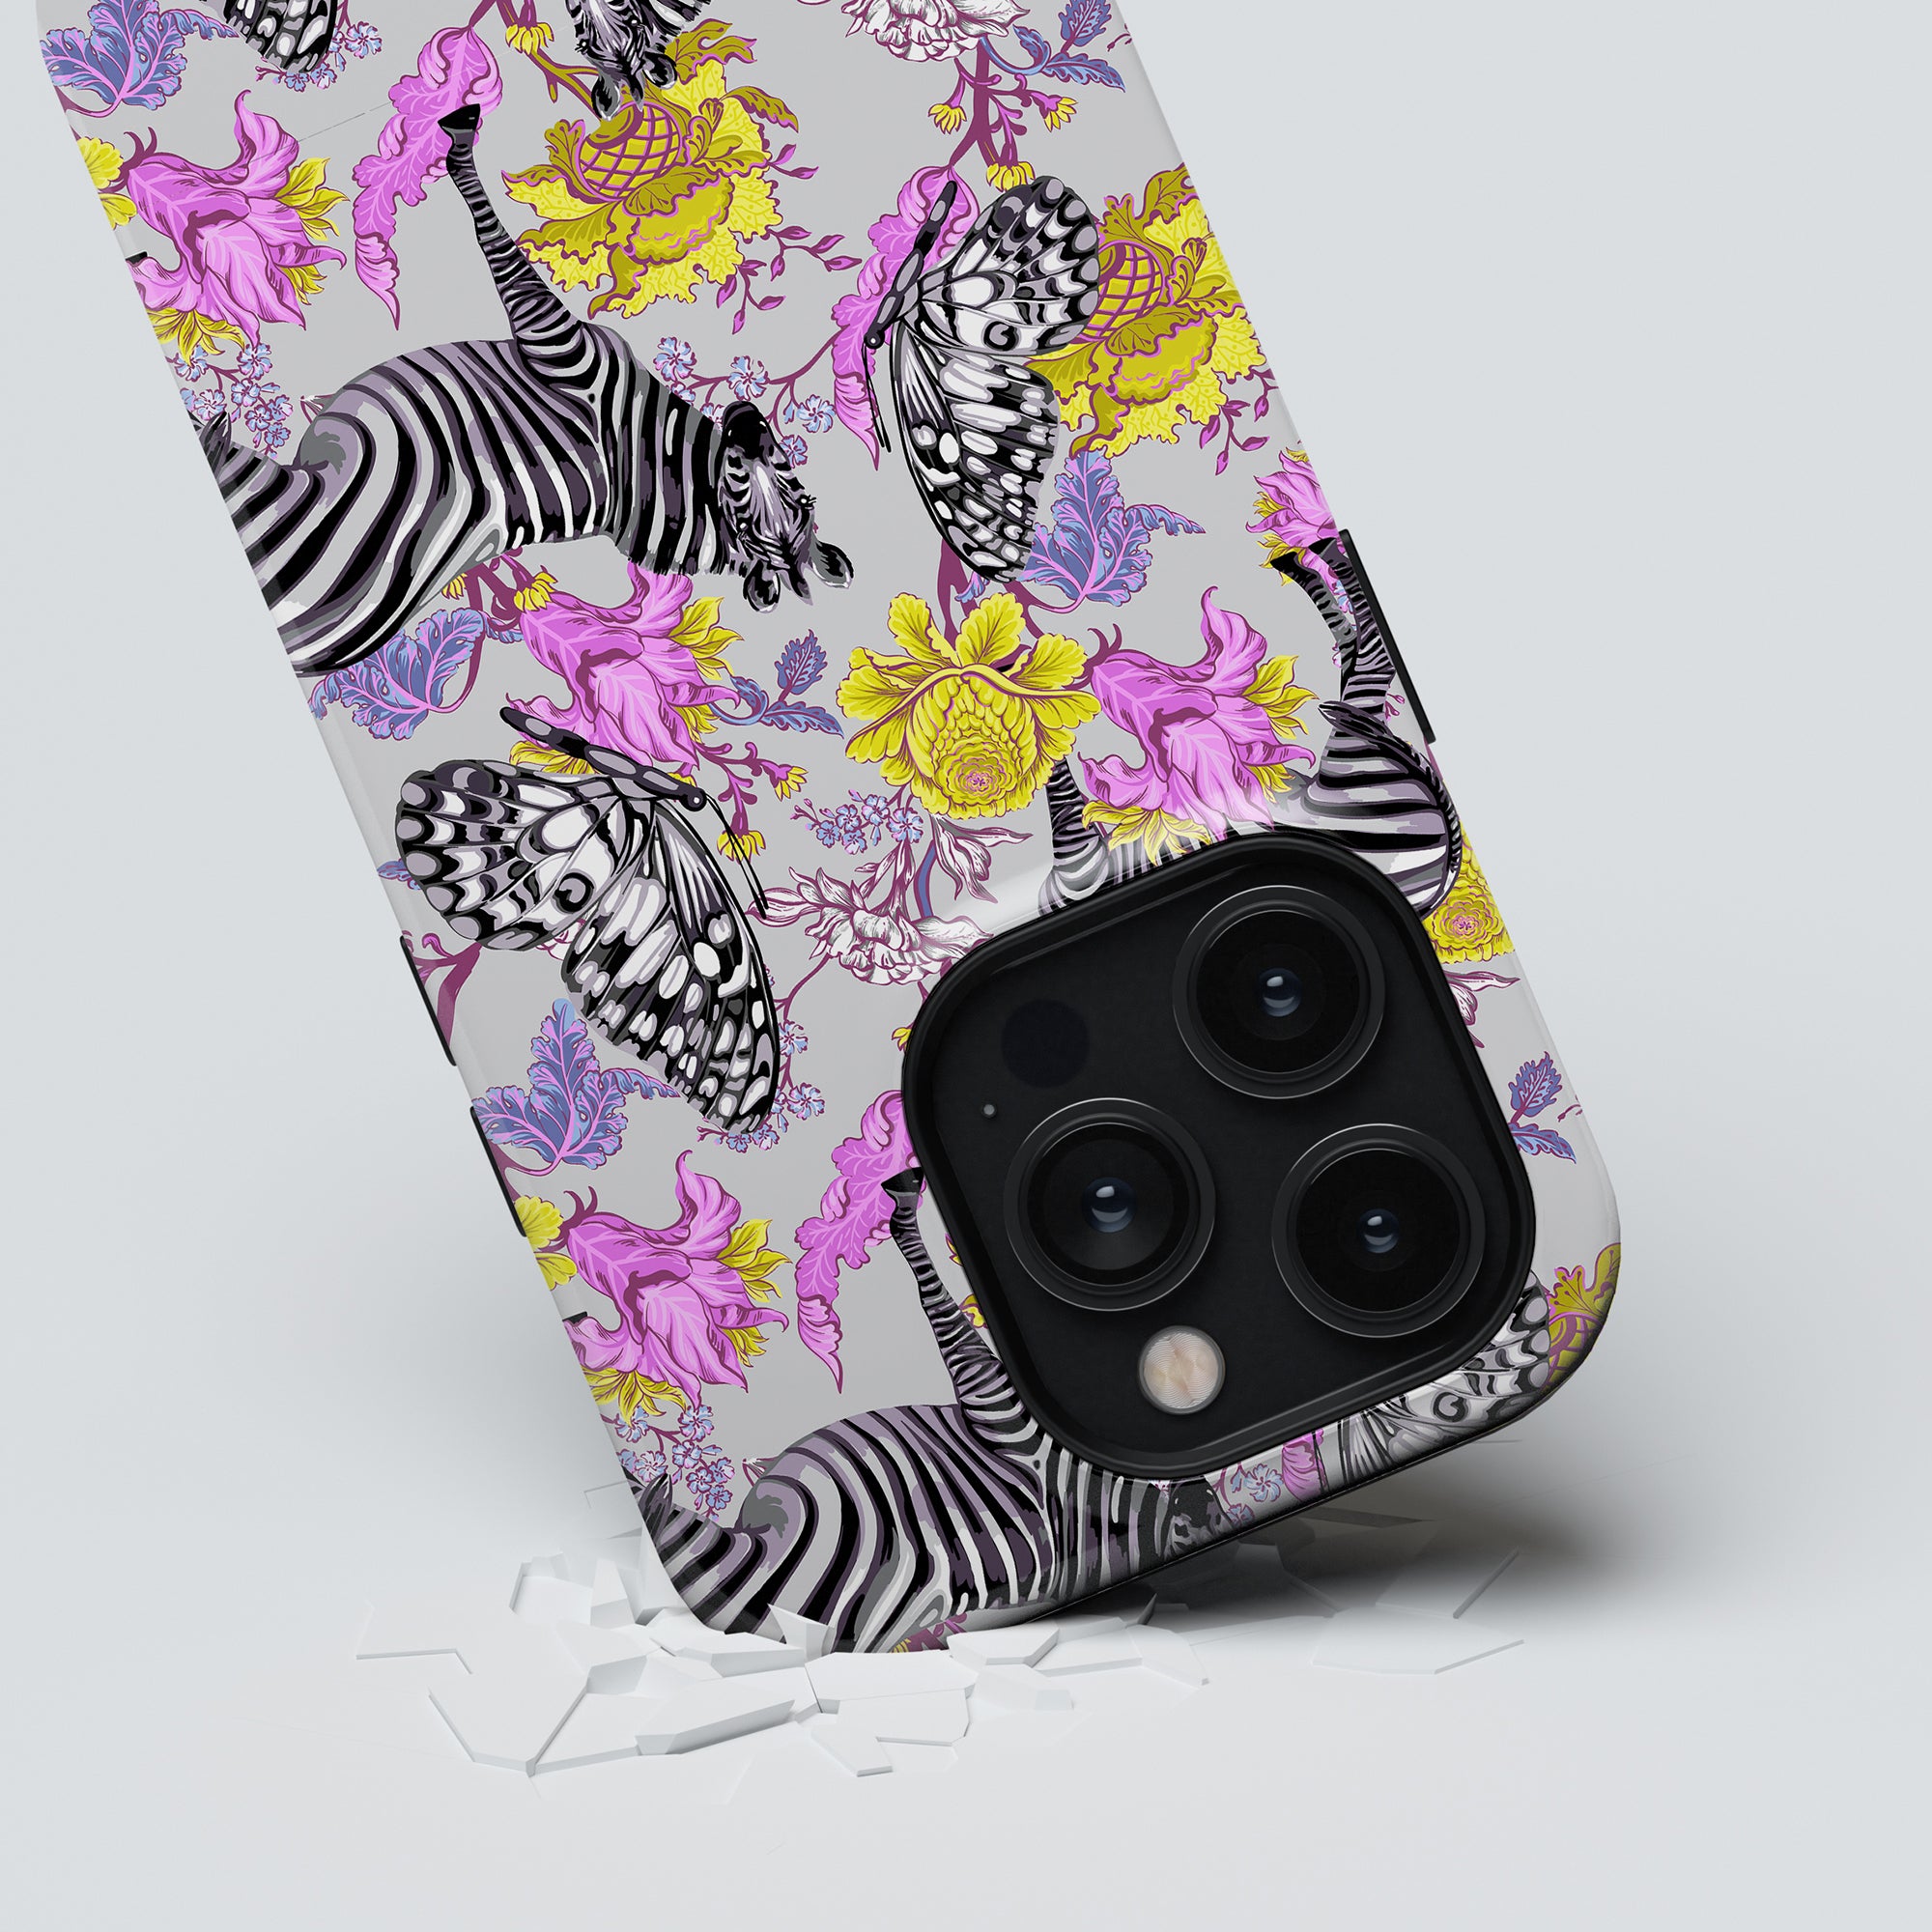 A smartphone with an Exotic Zebra - Tough Case lying face down, its camera breaking through the surface.